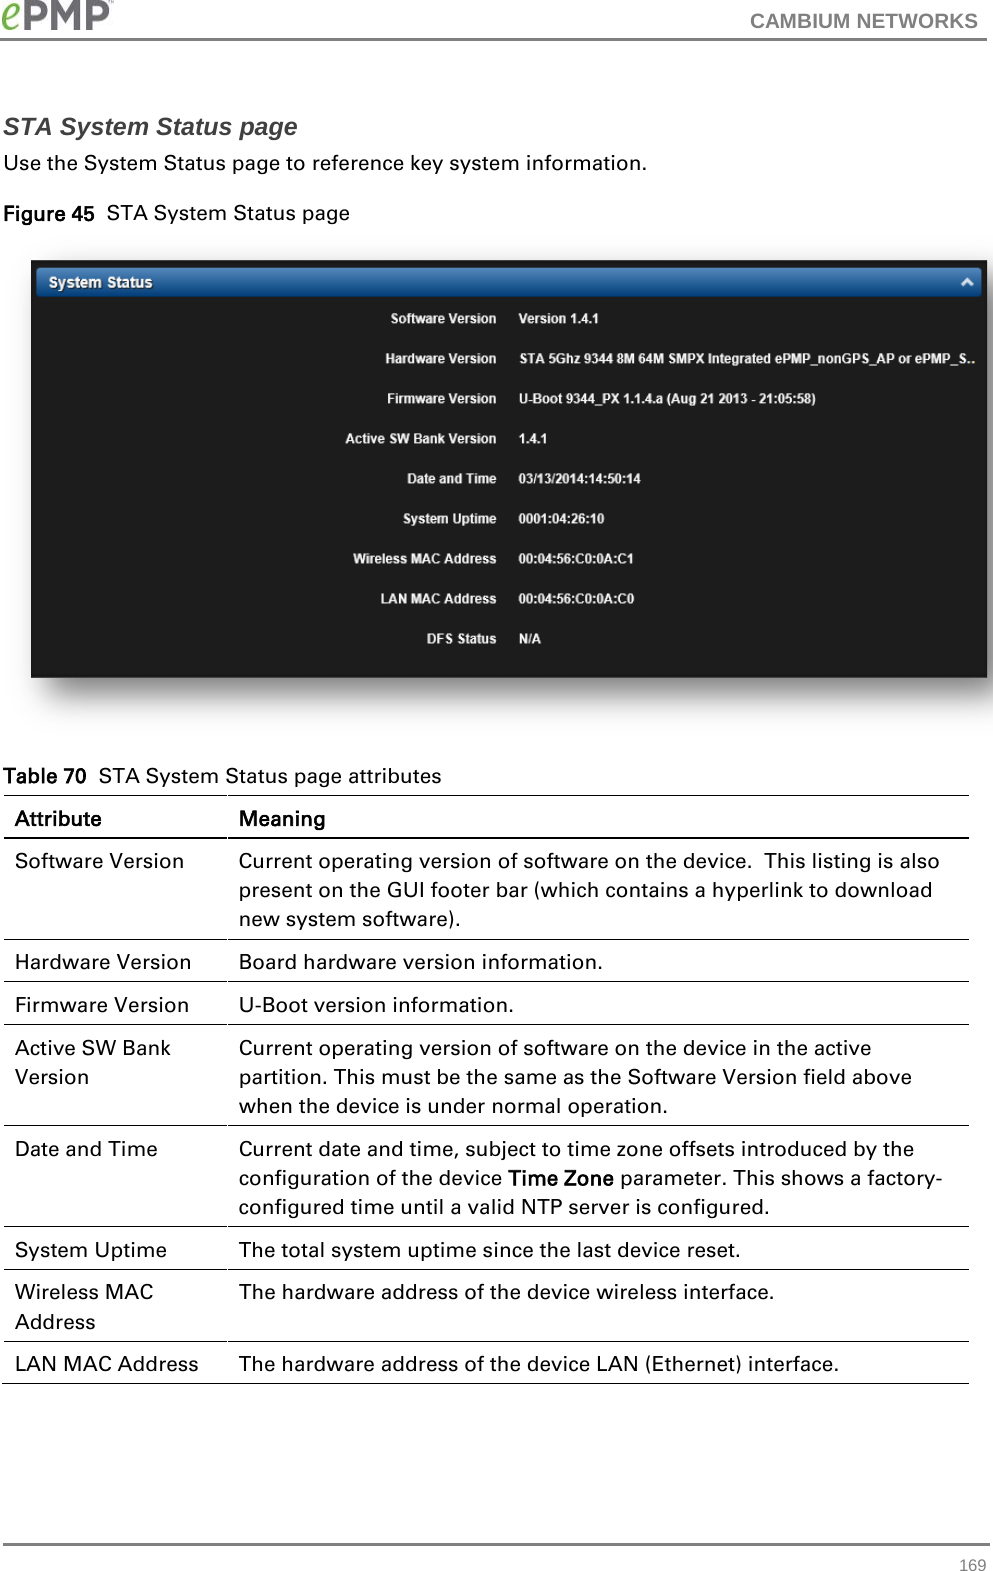 CAMBIUM NETWORKS  STA System Status page Use the System Status page to reference key system information. Figure 45  STA System Status page  Table 70  STA System Status page attributes Attribute Meaning Software Version Current operating version of software on the device.  This listing is also present on the GUI footer bar (which contains a hyperlink to download new system software). Hardware Version Board hardware version information. Firmware Version  U-Boot version information. Active SW Bank Version Current operating version of software on the device in the active partition. This must be the same as the Software Version field above when the device is under normal operation.  Date and Time Current date and time, subject to time zone offsets introduced by the configuration of the device Time Zone parameter. This shows a factory-configured time until a valid NTP server is configured. System Uptime The total system uptime since the last device reset. Wireless MAC Address The hardware address of the device wireless interface. LAN MAC Address The hardware address of the device LAN (Ethernet) interface.  169 